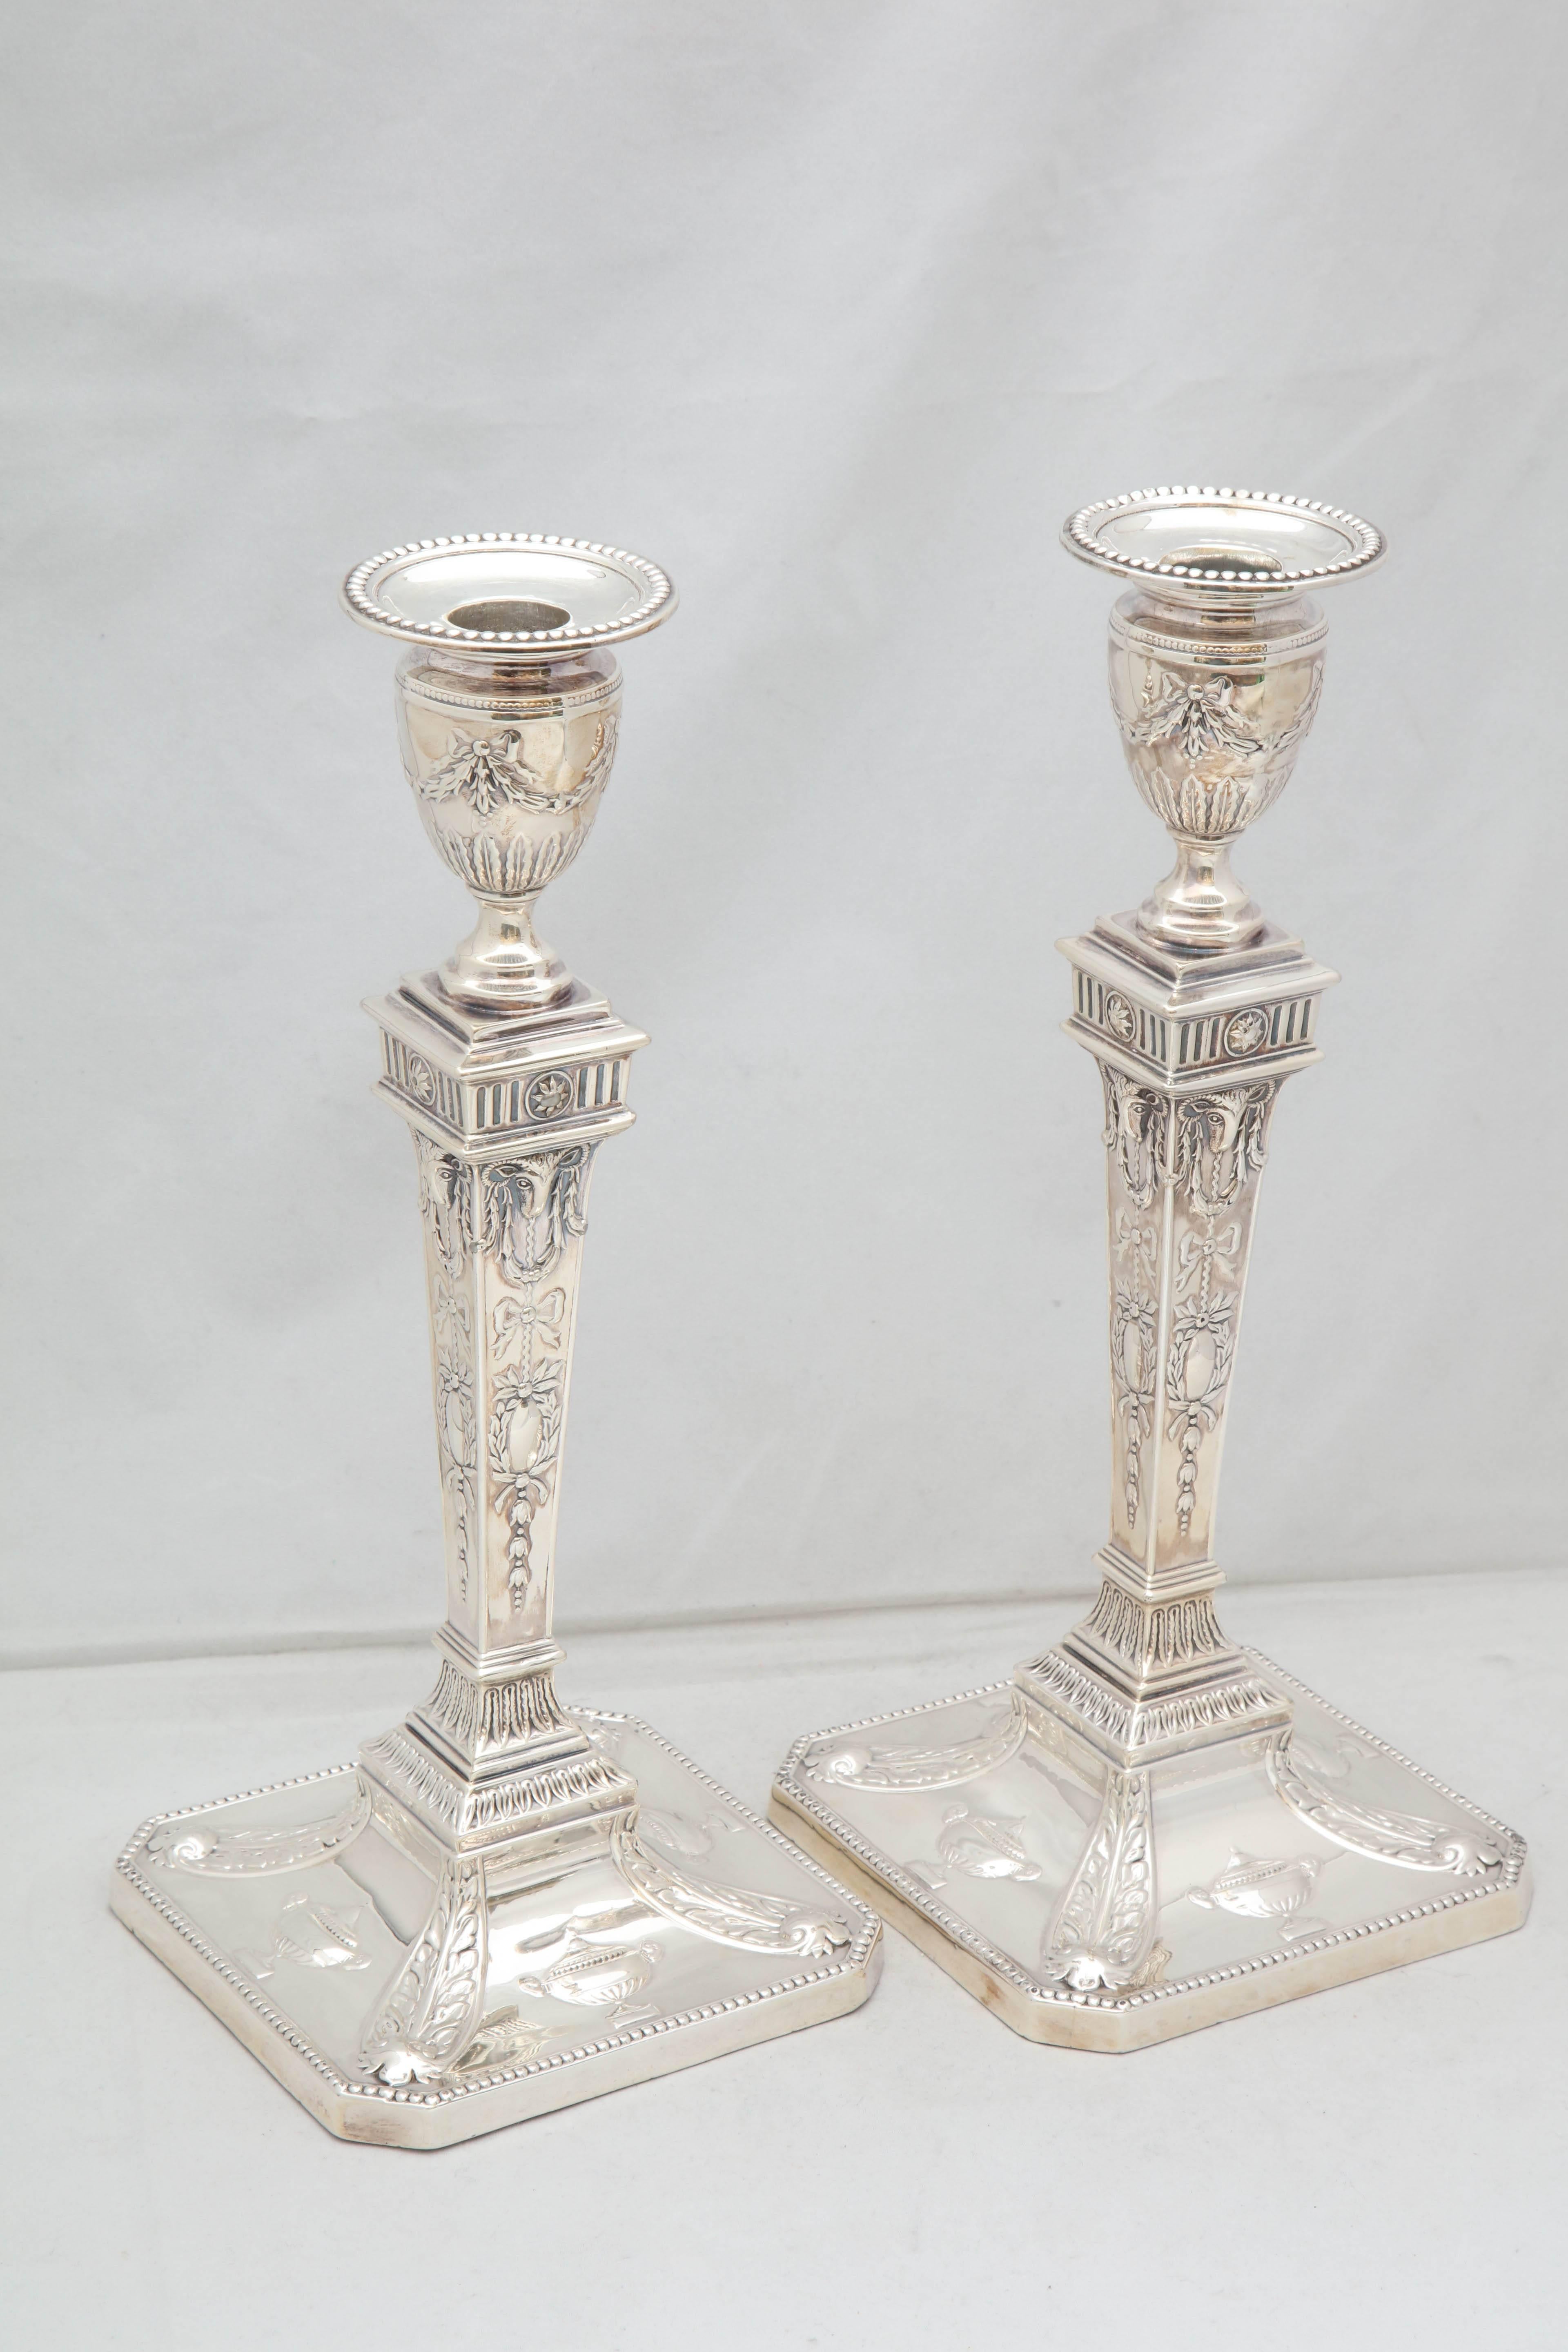 Tall pair of Edwardian, sterling silver, Adam Style candlesticks, London, 1904, Charles Boynton & Sons, Ltd.- makers. Measures: 12 inches high x 6 inches wide x 6 inches deep. Square, bases. Weighted. Decorated with garlands, ram's heads, urns, etc.